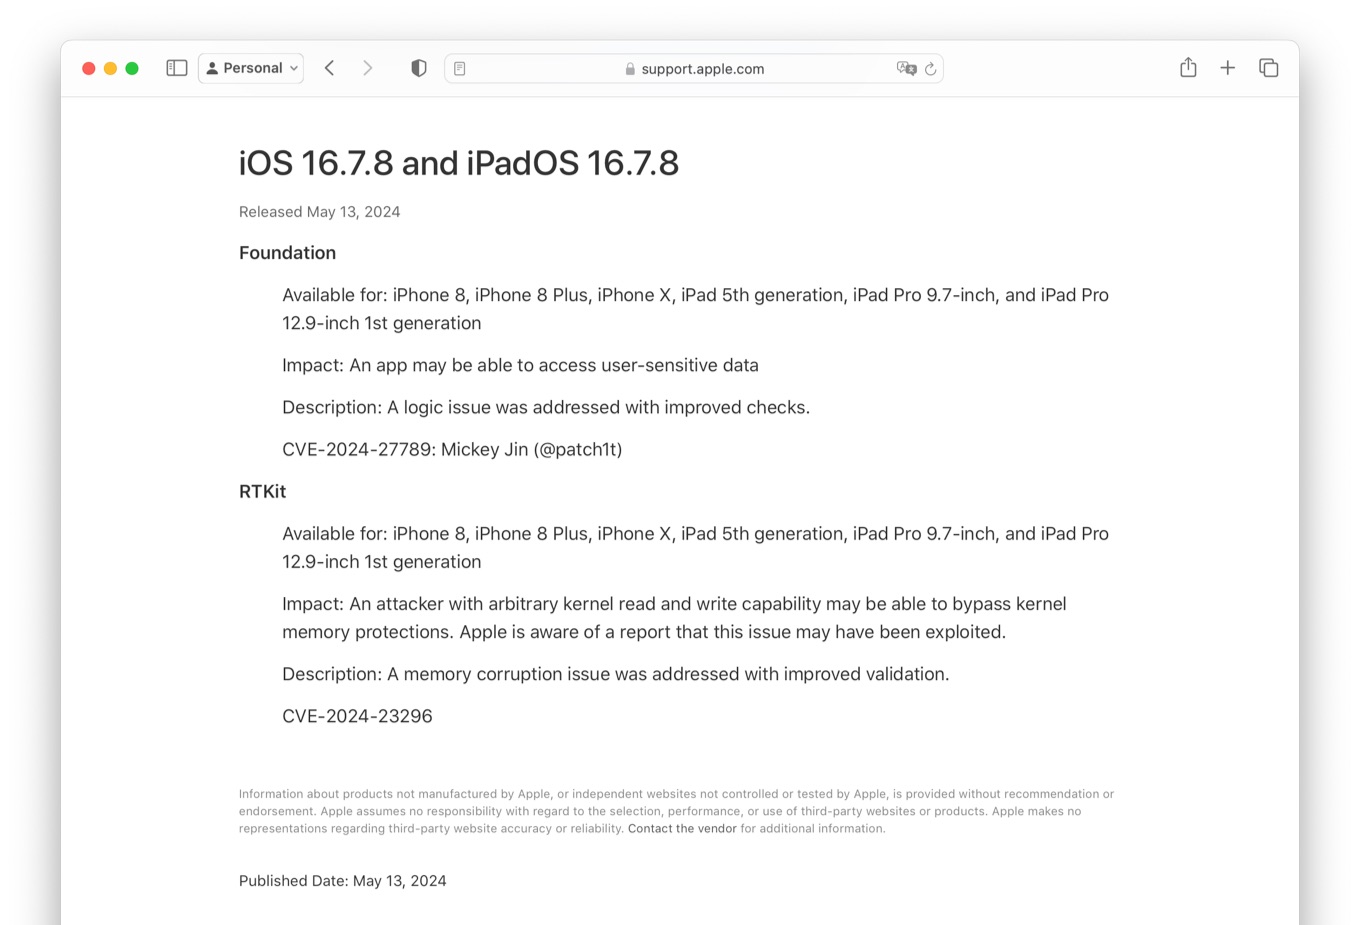 About the security content of iOS 16.7.8 and iPadOS 16.7.8